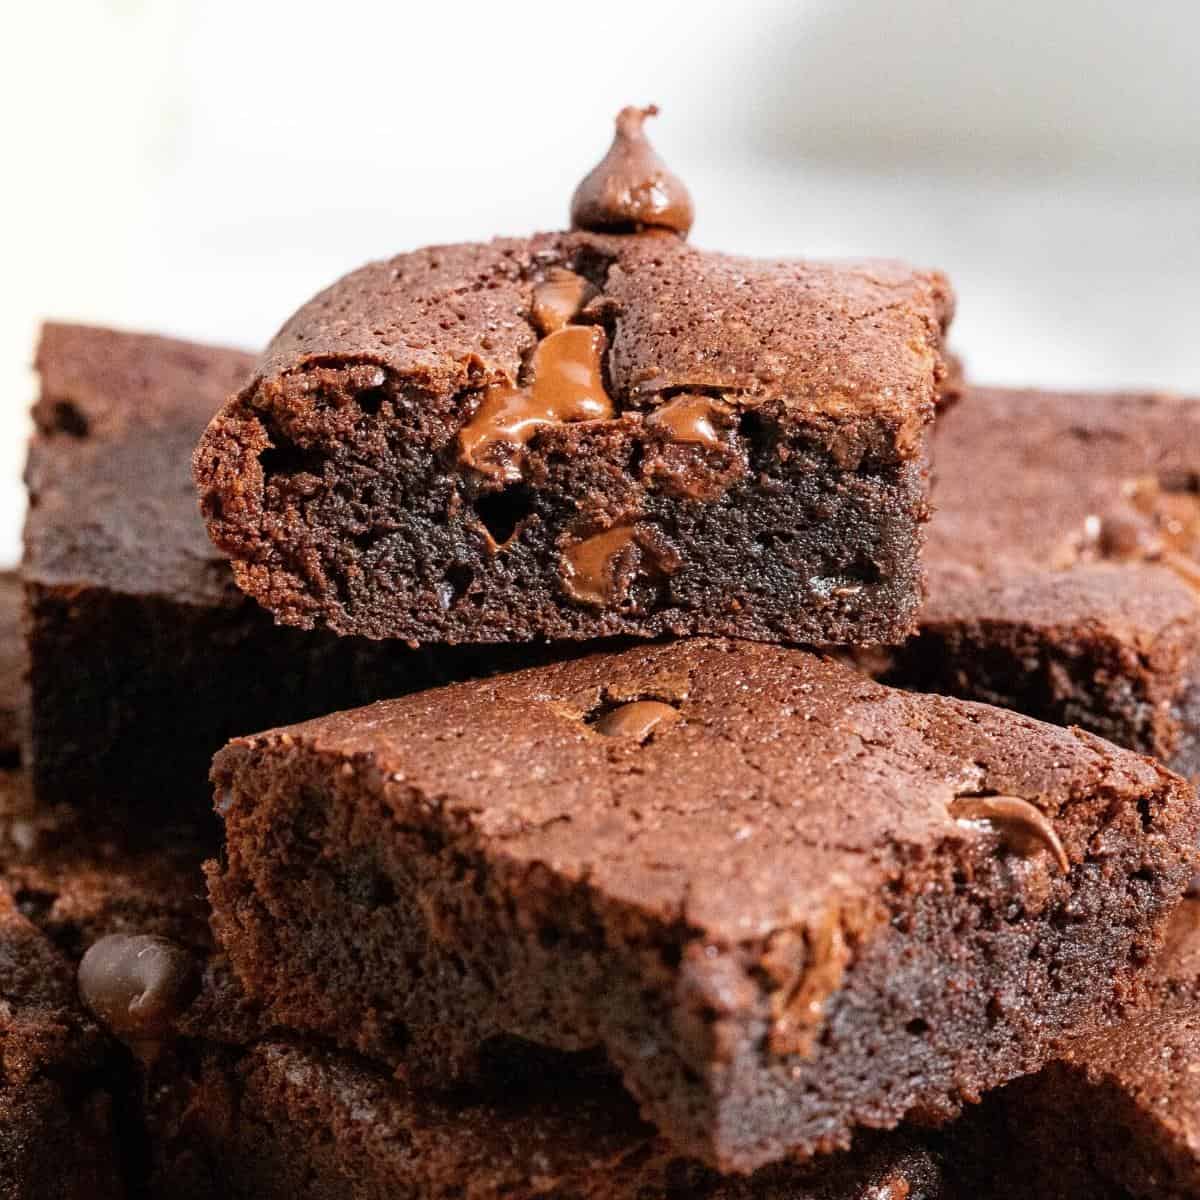 Brownie squares on the table.